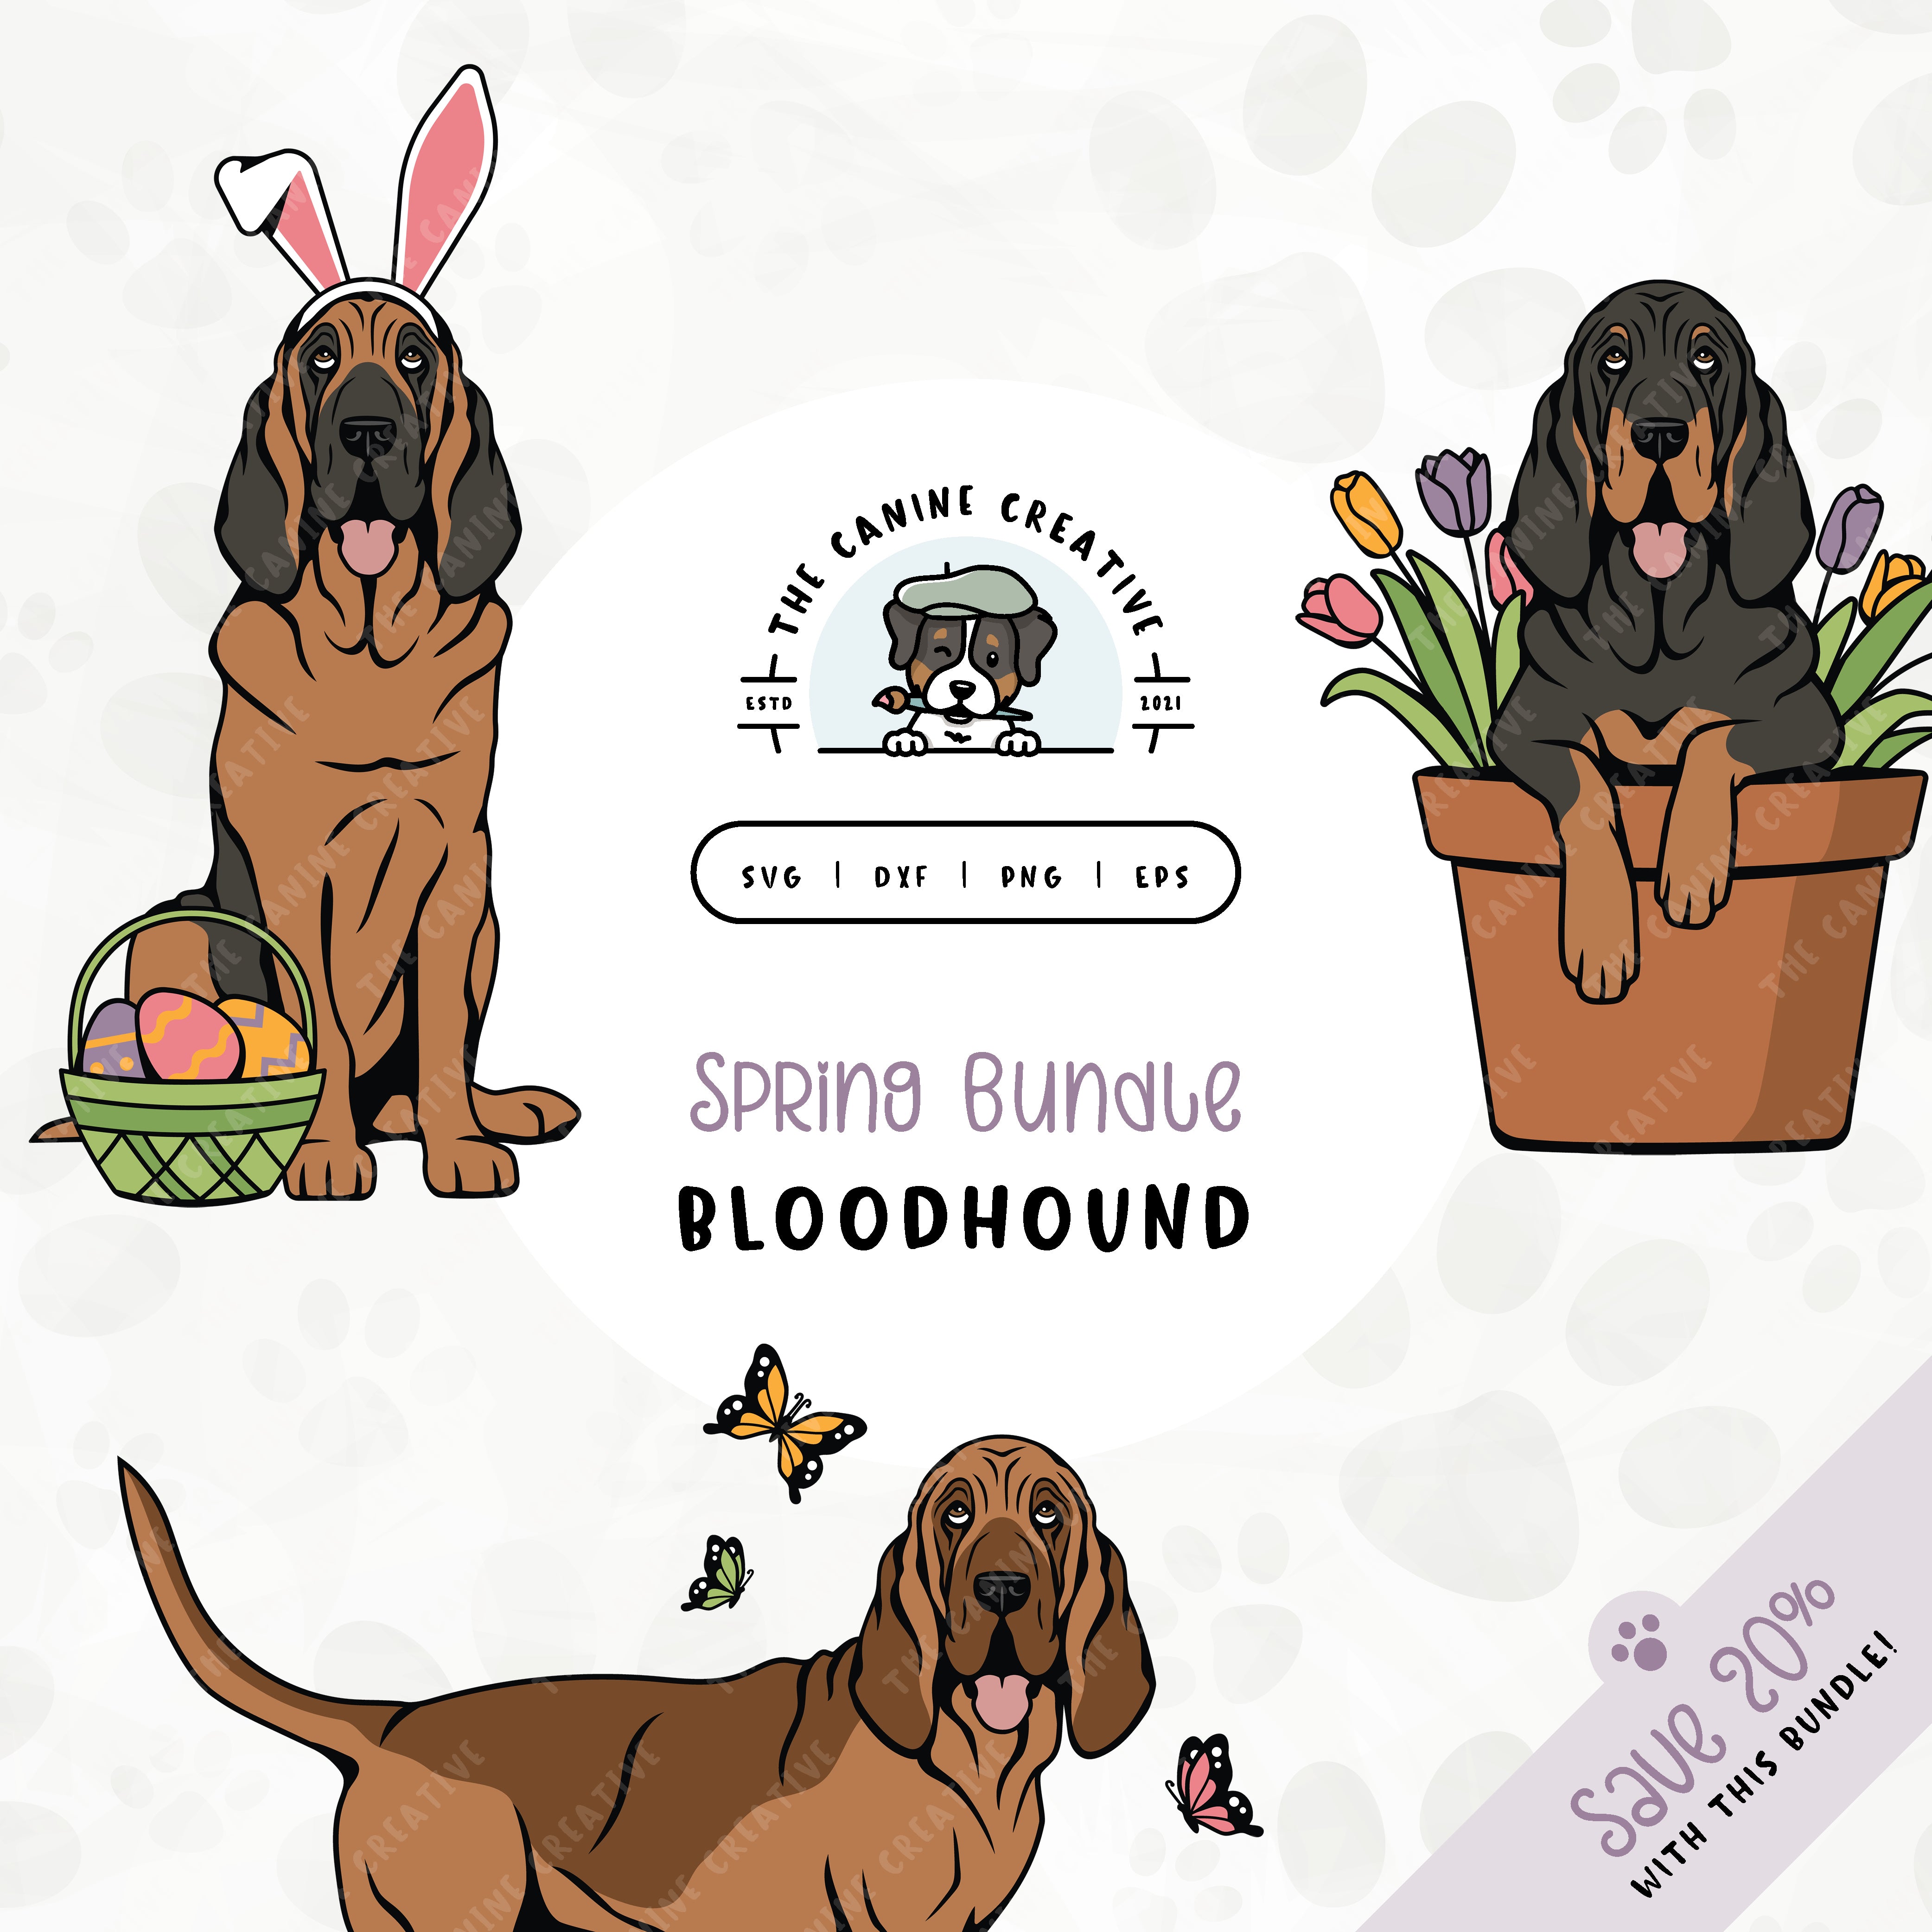 This 3-pack springtime illustration bundle features Bloodhounds among colorful butterflies, peeking out from a pot of vibrant tulips, and wearing festive bunny ears while sitting near a basket of brightly-colored Easter eggs. File formats include: SVG, DXF, PNG, and EPS.